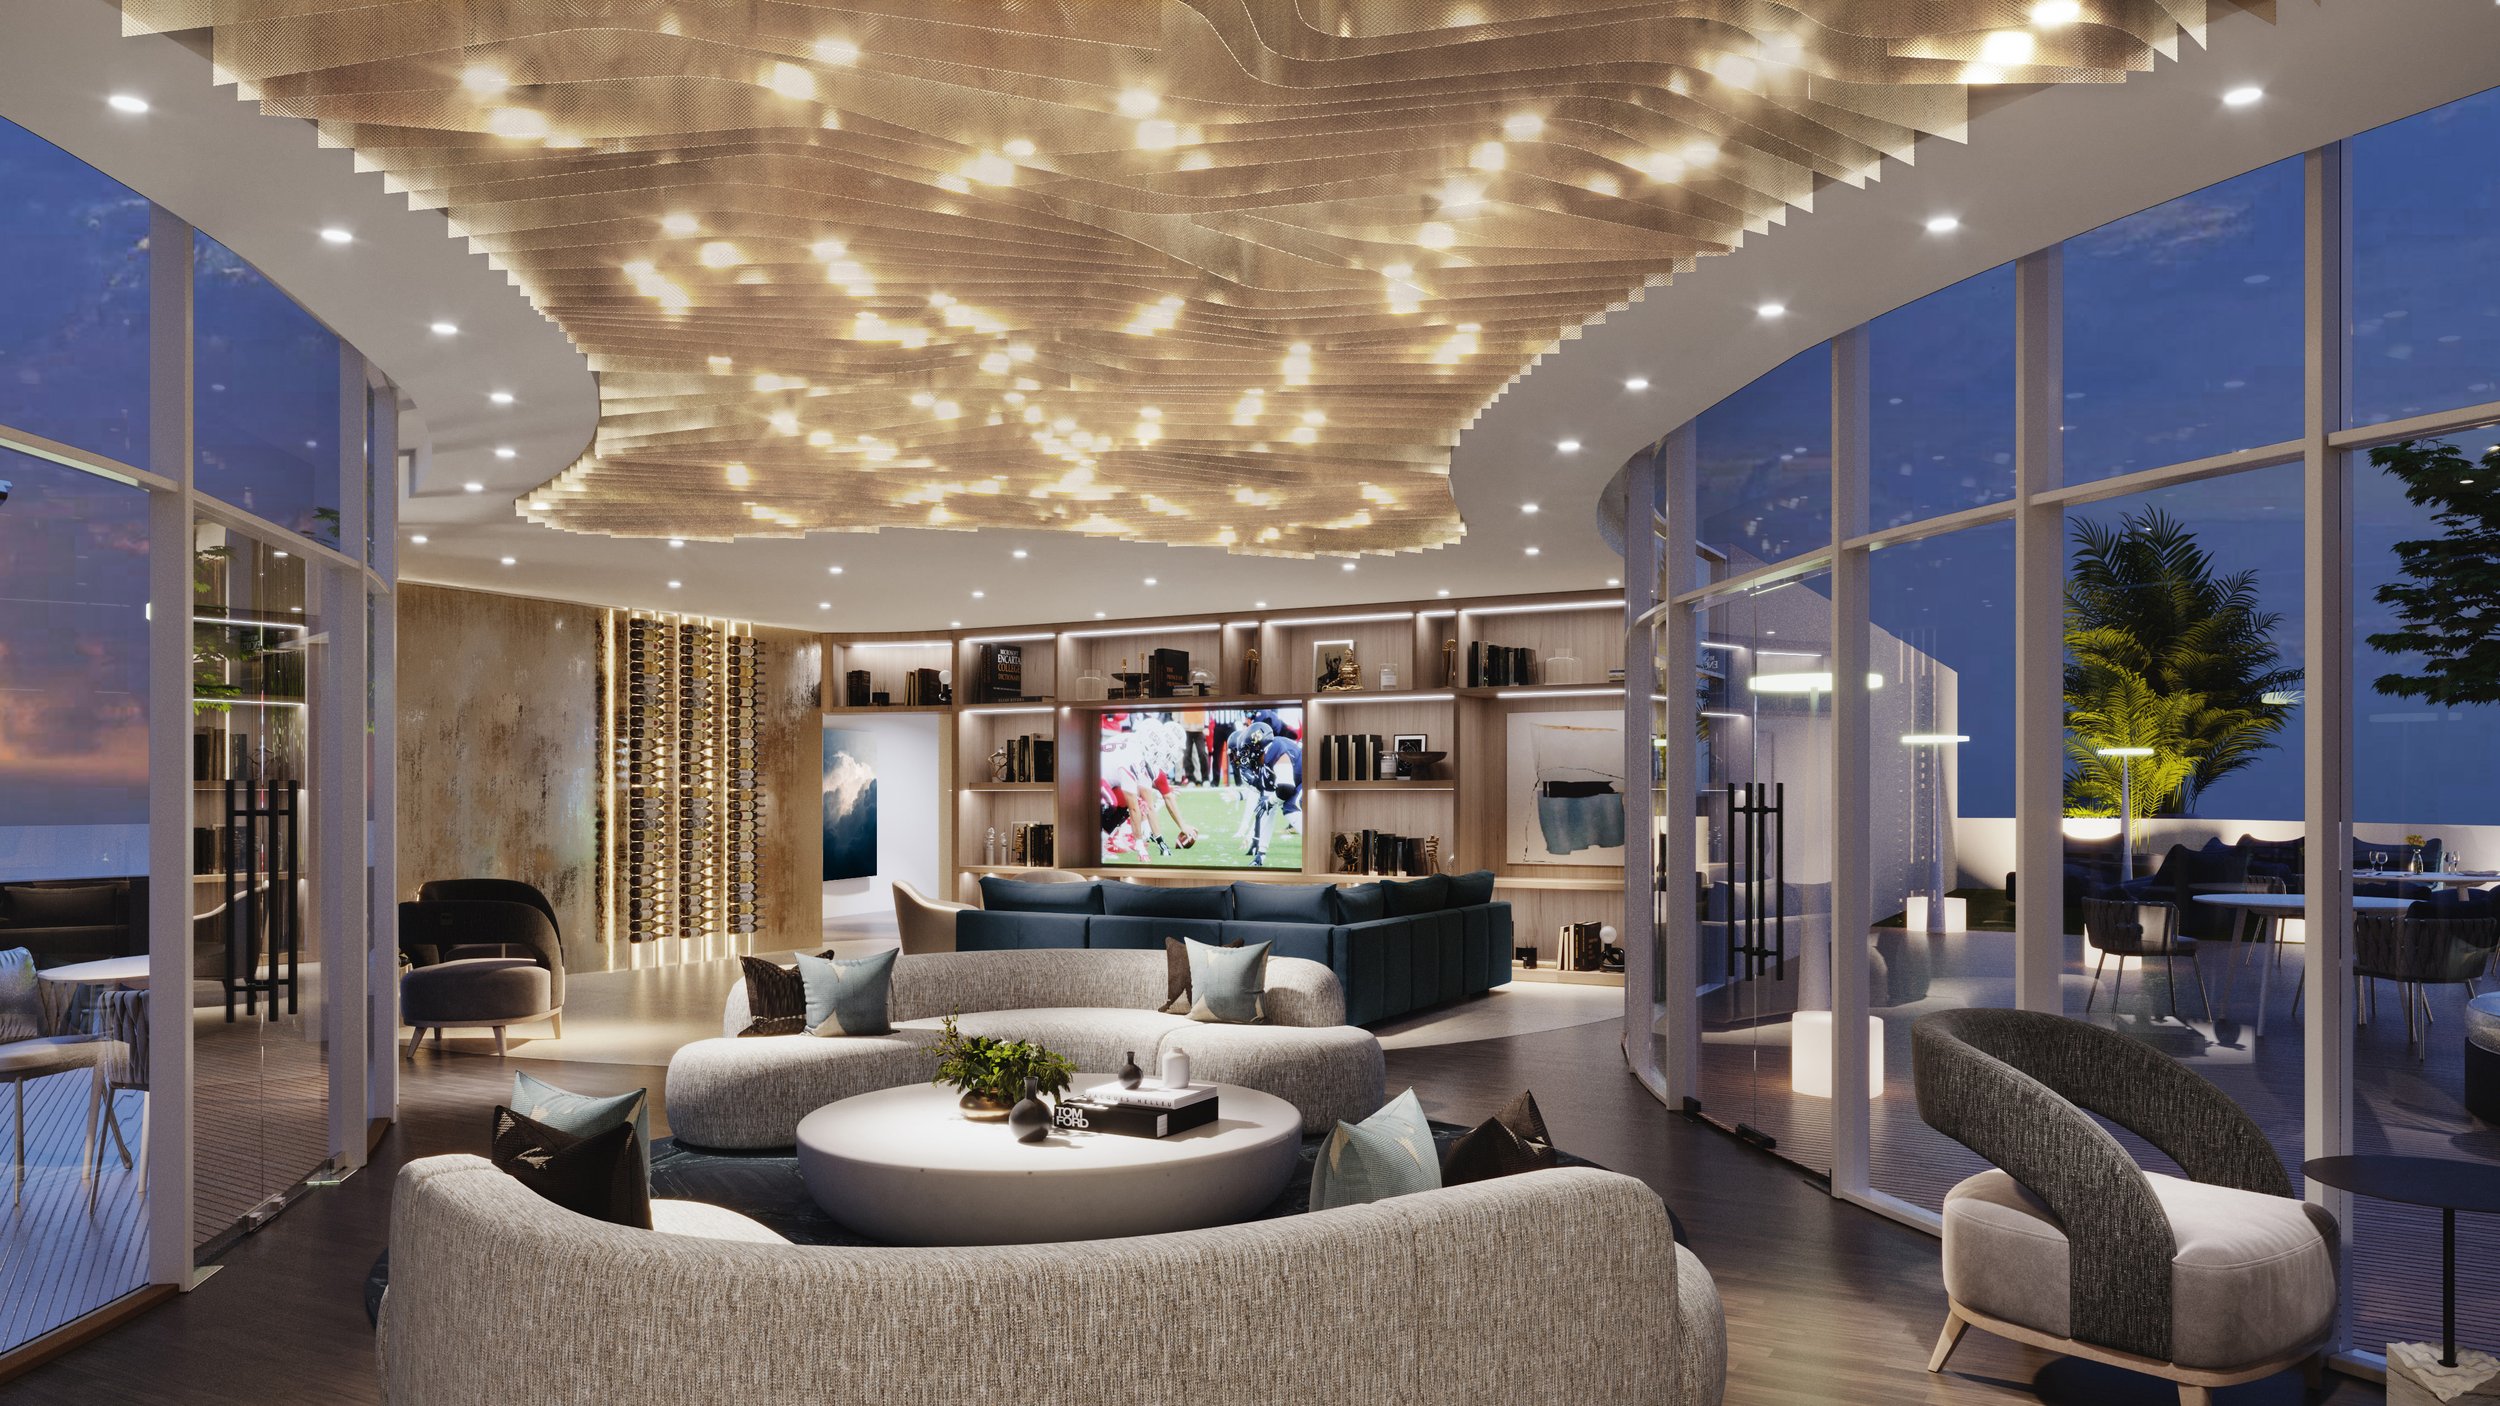 Tal Aventura Reveals Interior And Amenity Renderings Imagined By IDEA Architects and IDDI 26.jpg